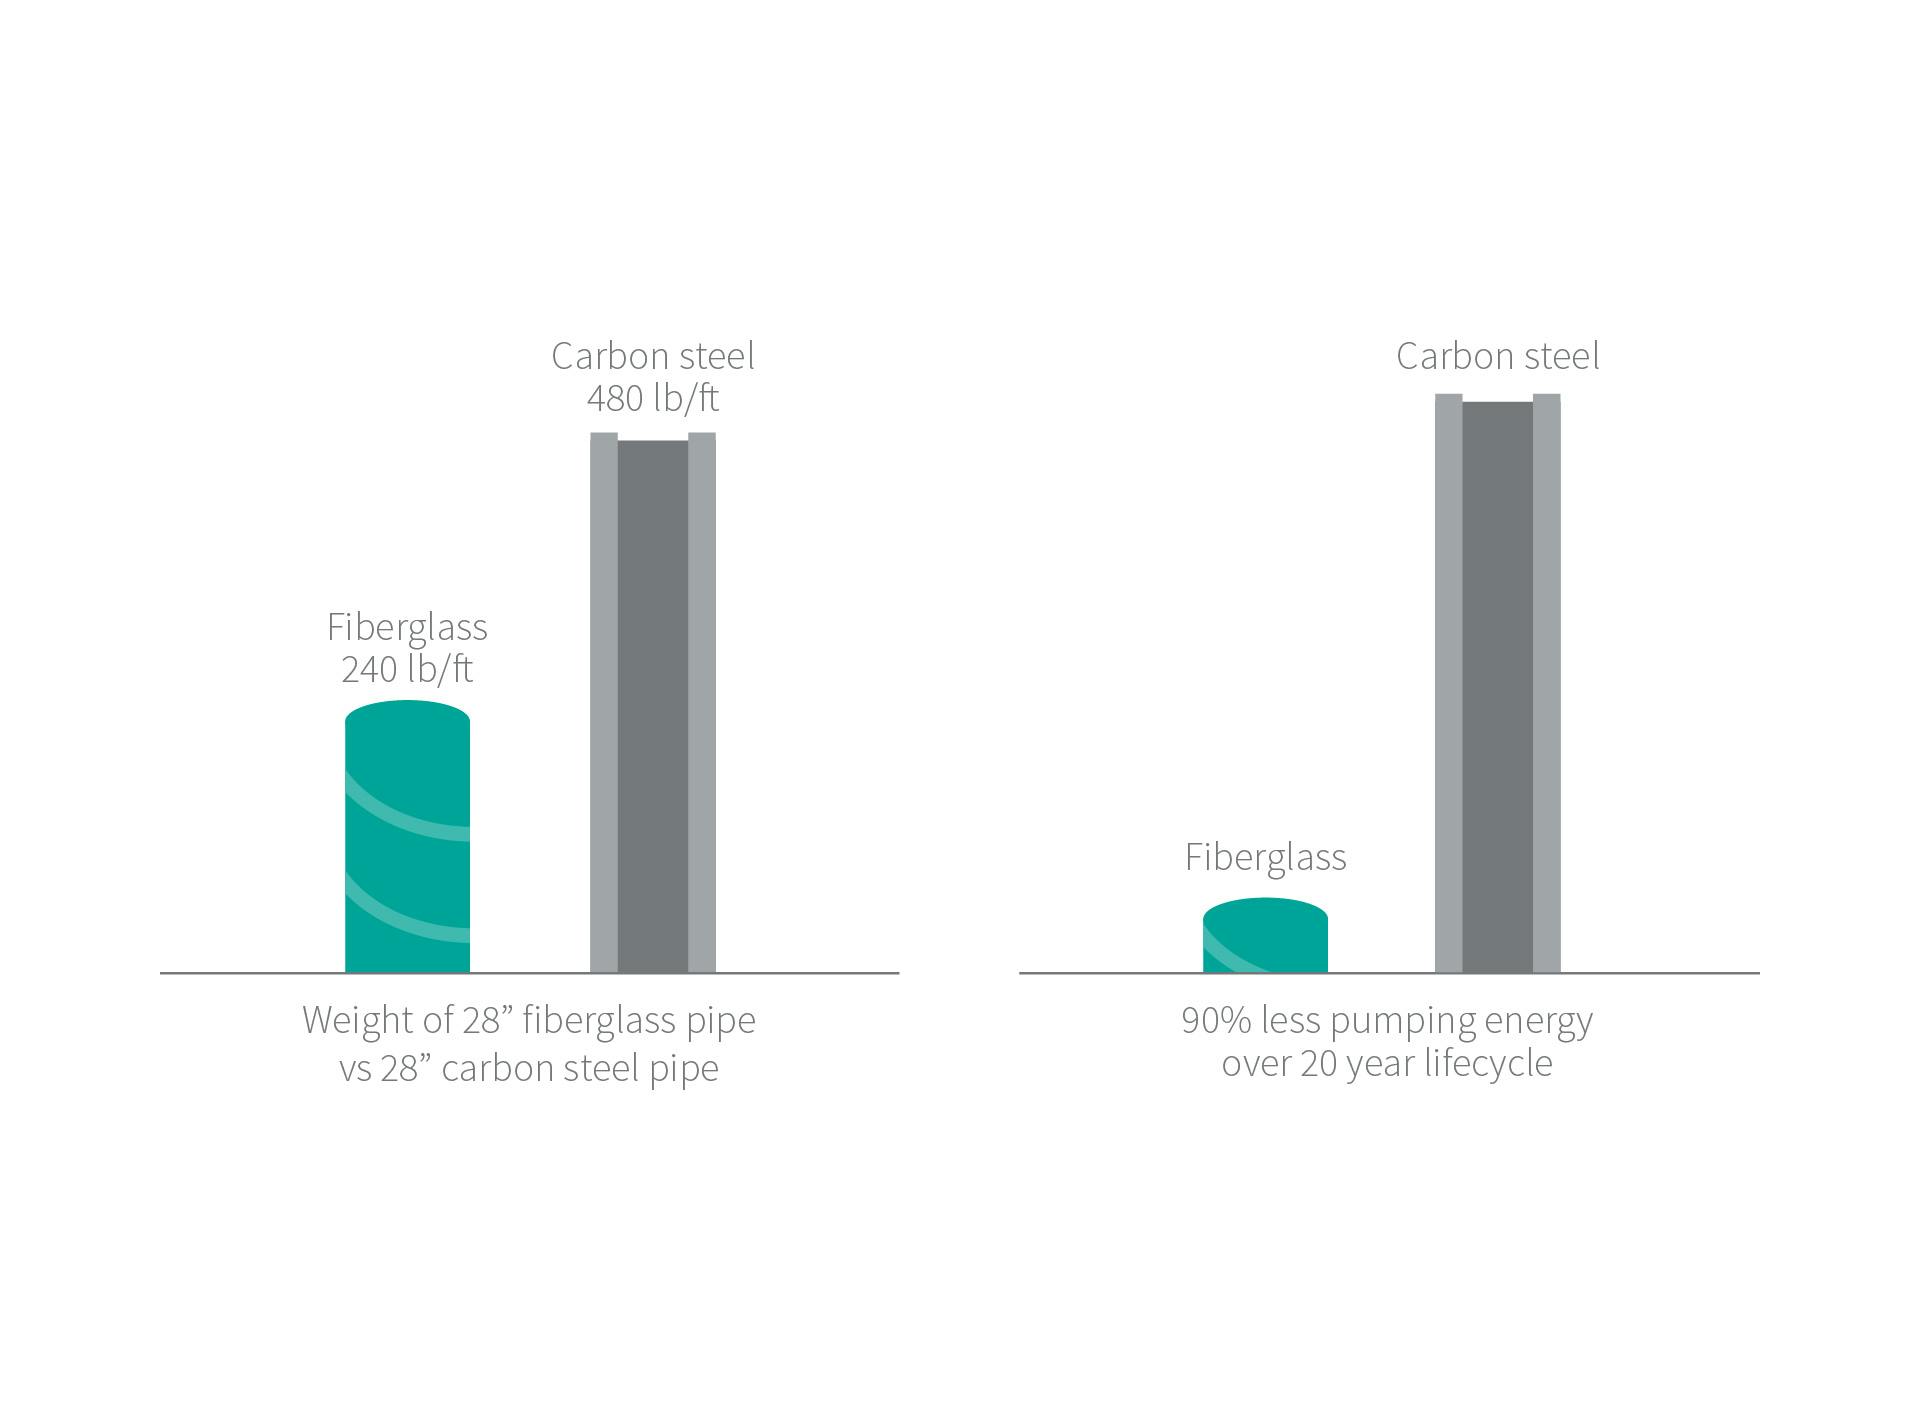 A graphic demonstrating the weight and pumping energy differences between fiberglass and carbon steel